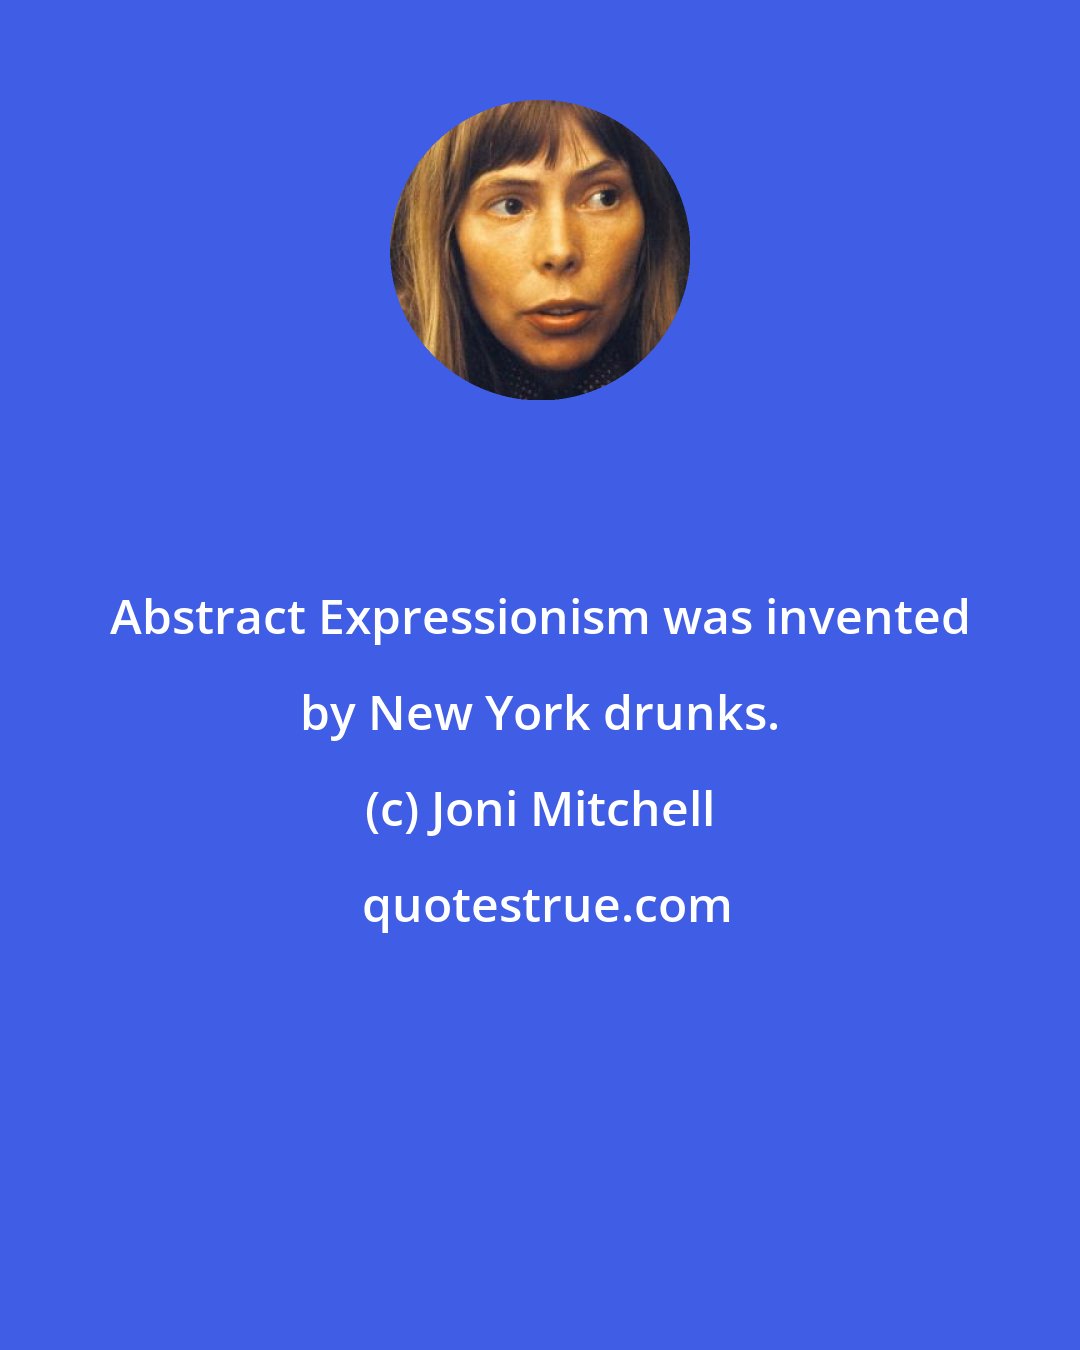 Joni Mitchell: Abstract Expressionism was invented by New York drunks.